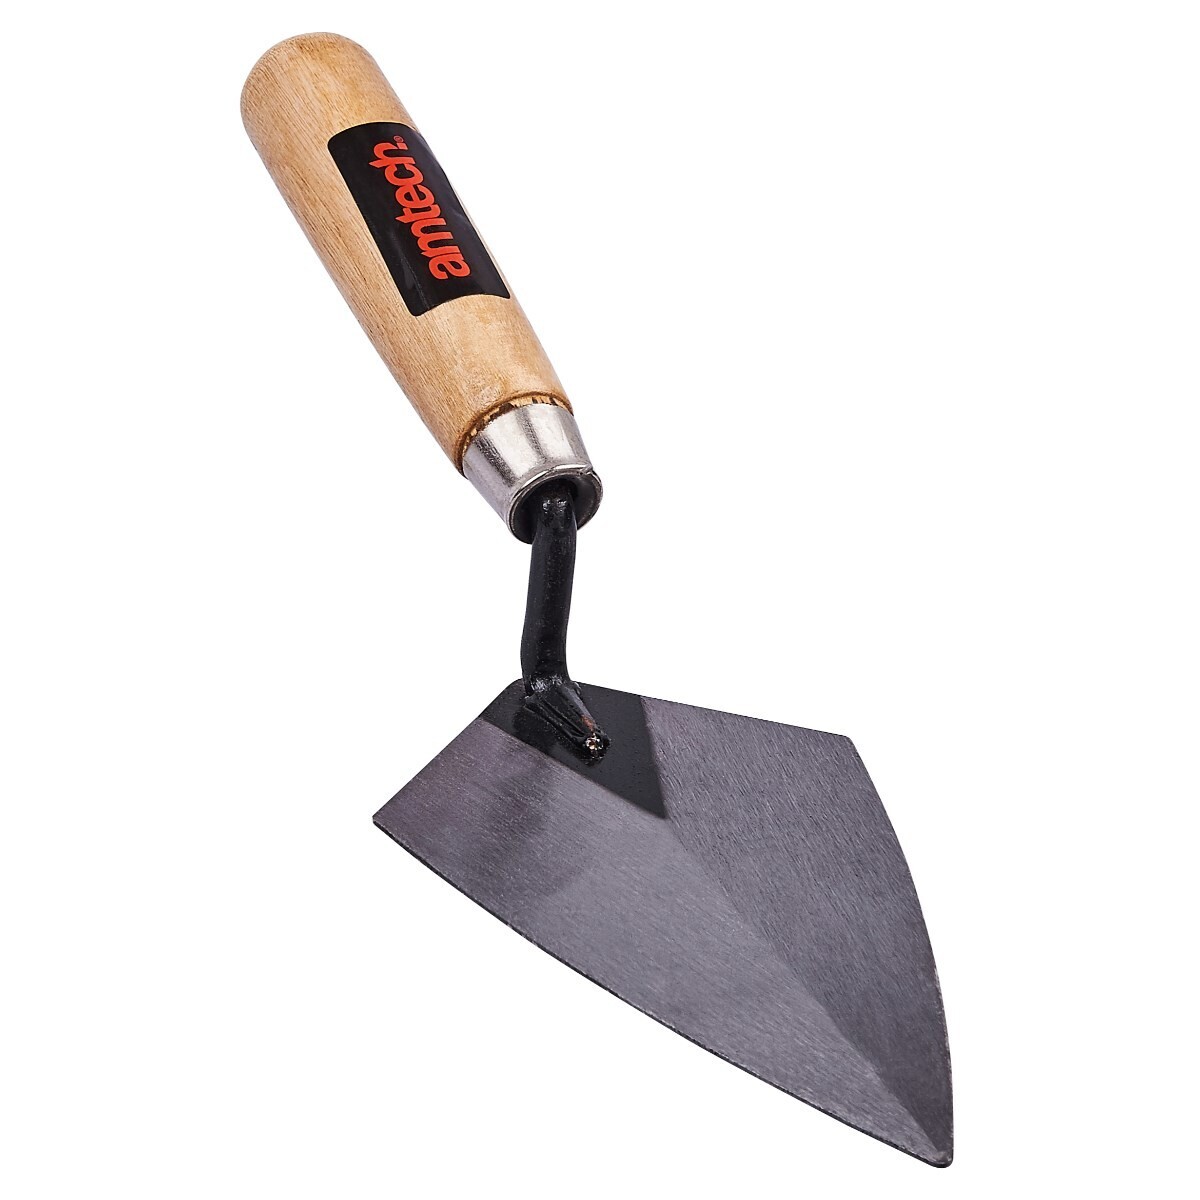 6″ Pointing trowel